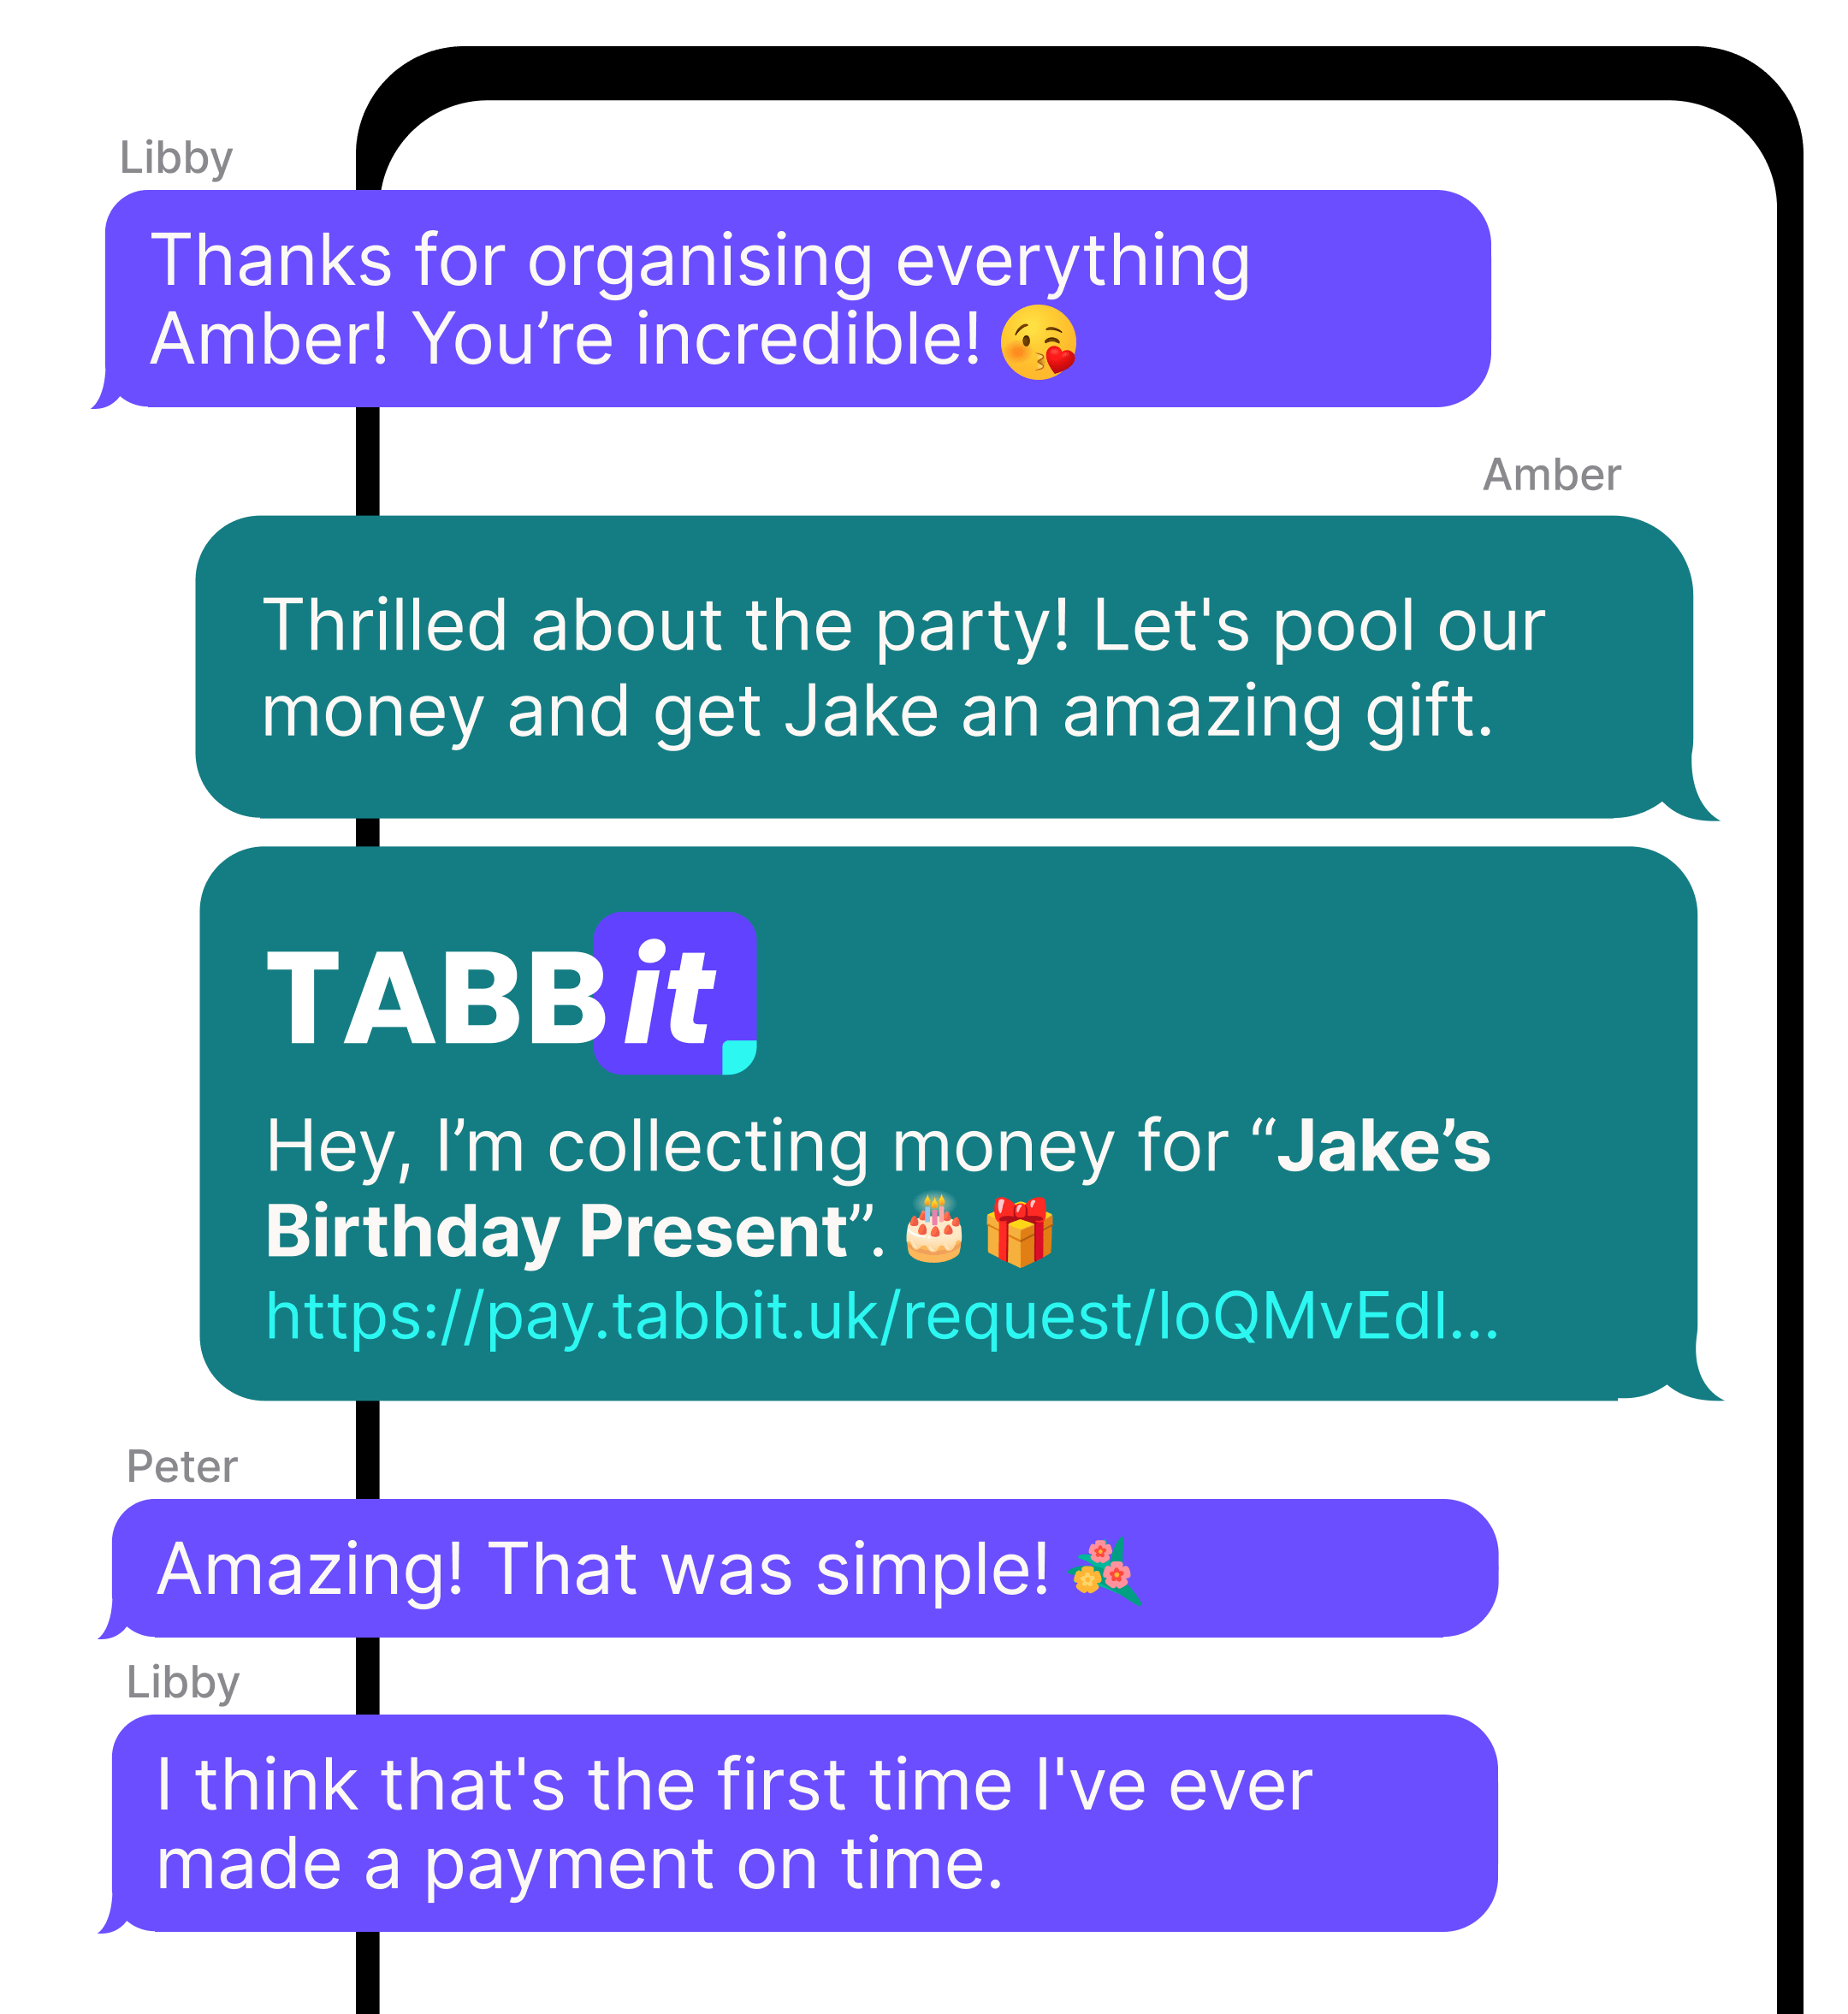 Share a night out with friends via TABBit